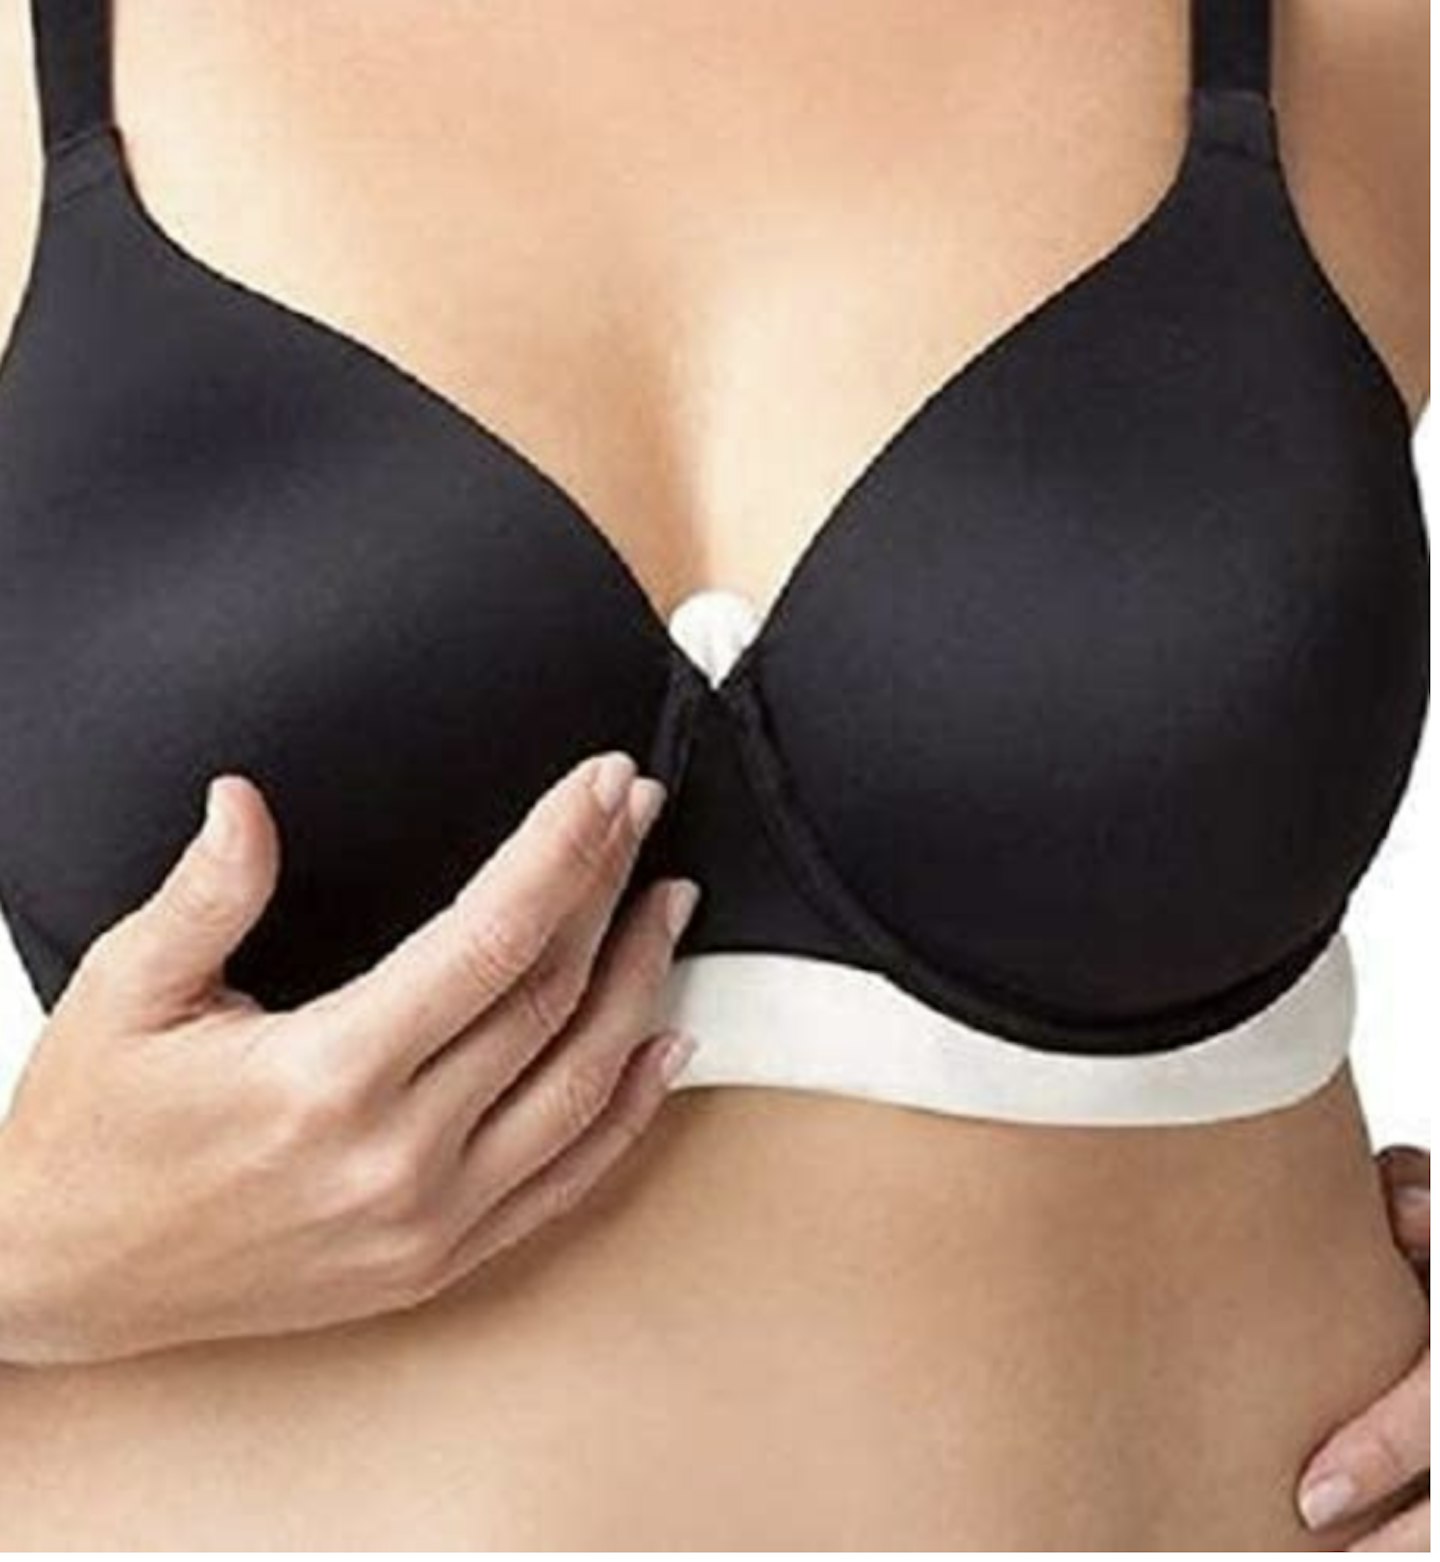 Women Are Raving About This £10 Bra Liner For Sweaty Boobs